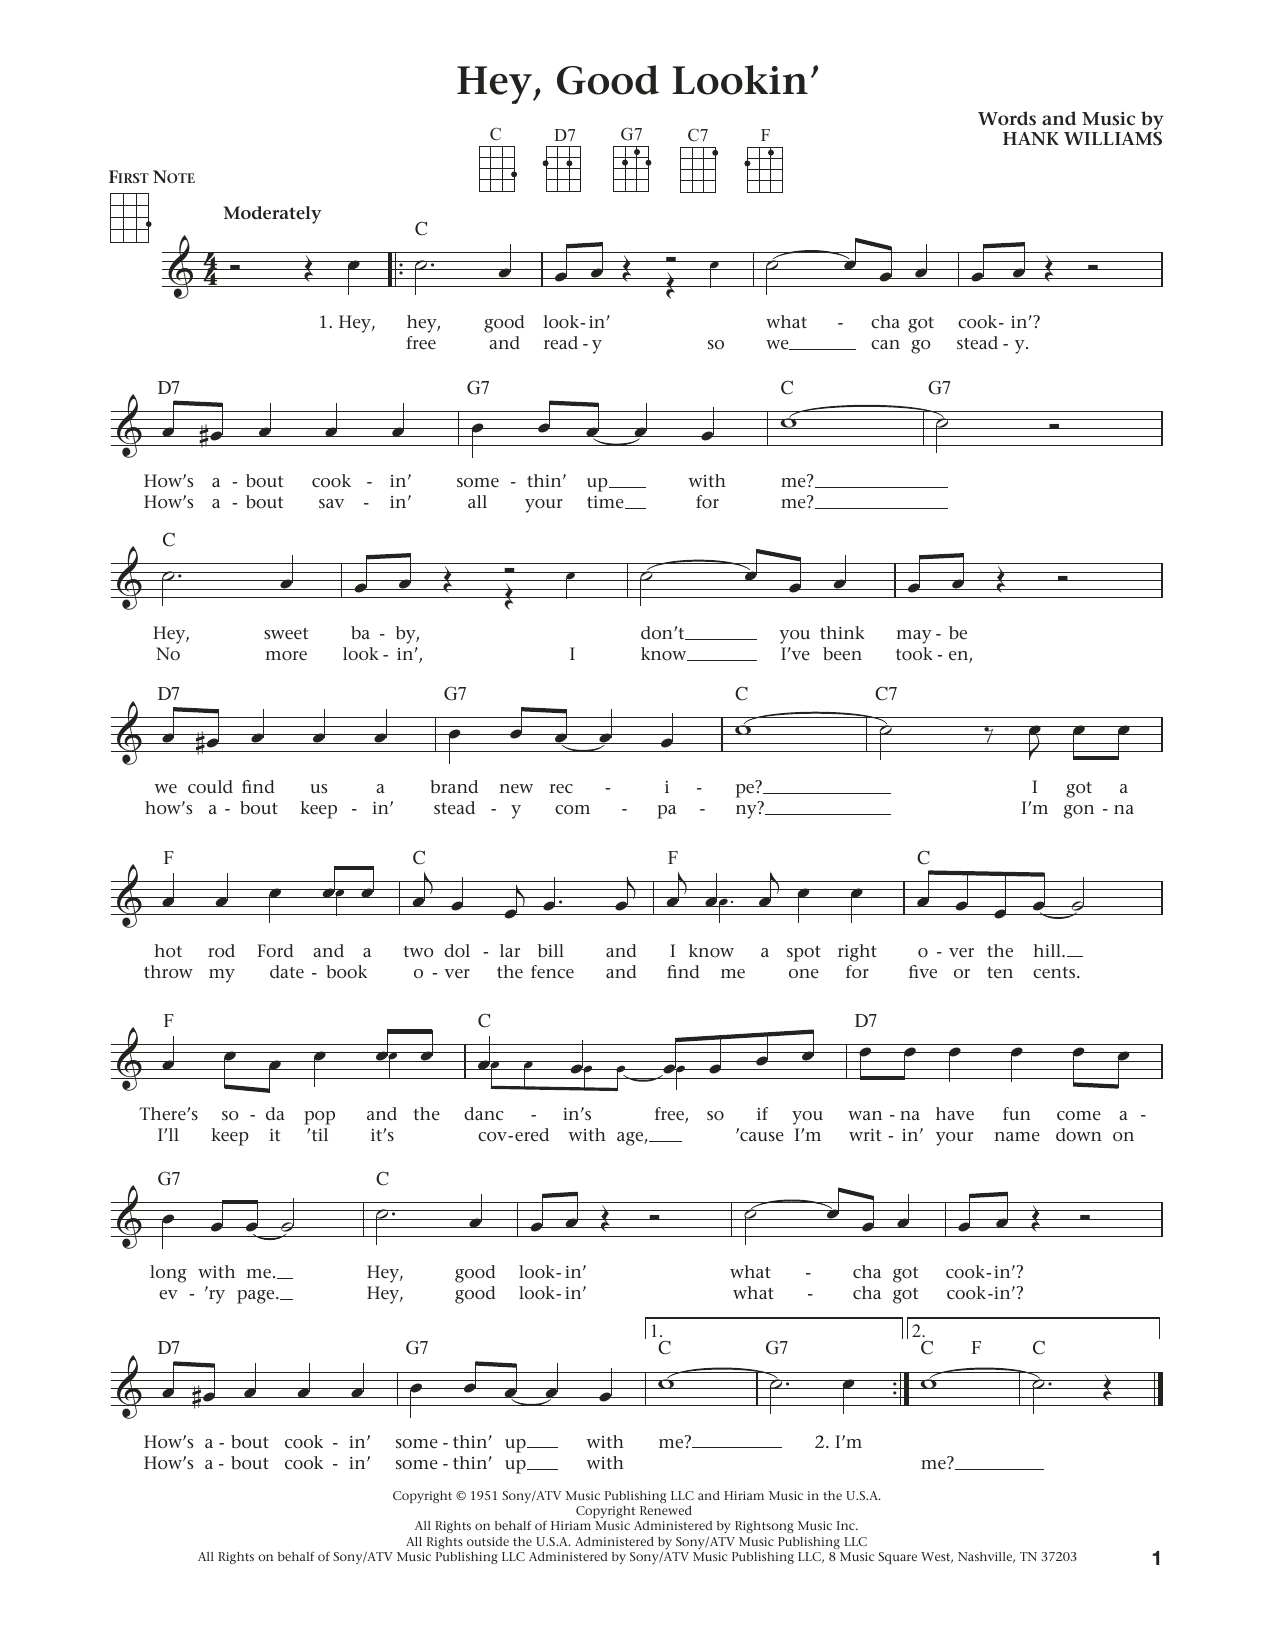 Download Hank Williams Hey, Good Lookin' (from The Daily Ukule Sheet Music